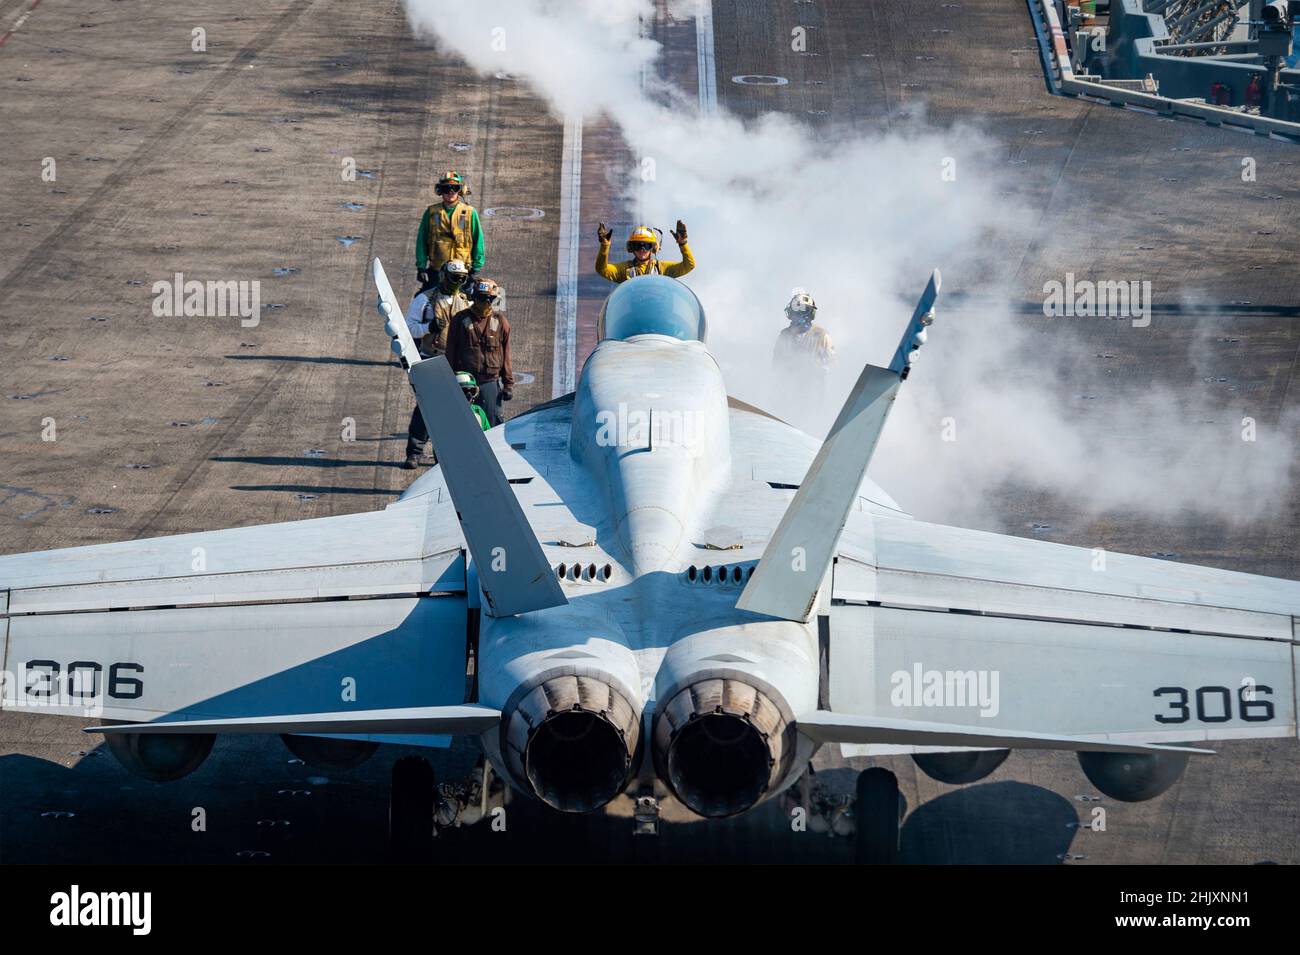 South China Sea, United States. 24 January, 2022. A U.S. Navy F/A-18E Super Hornet fighter jet, attached to the Golden Dragons of Strike Fighter Squadron 192, prepares to launch off the flight deck of the Nimitz-class aircraft carrier USS Carl Vinson during dual carrier operations January 24, 2022 in the South China Sea.  Credit: MCS Leon Vonguyen/Planetpix/Alamy Live News Stock Photo